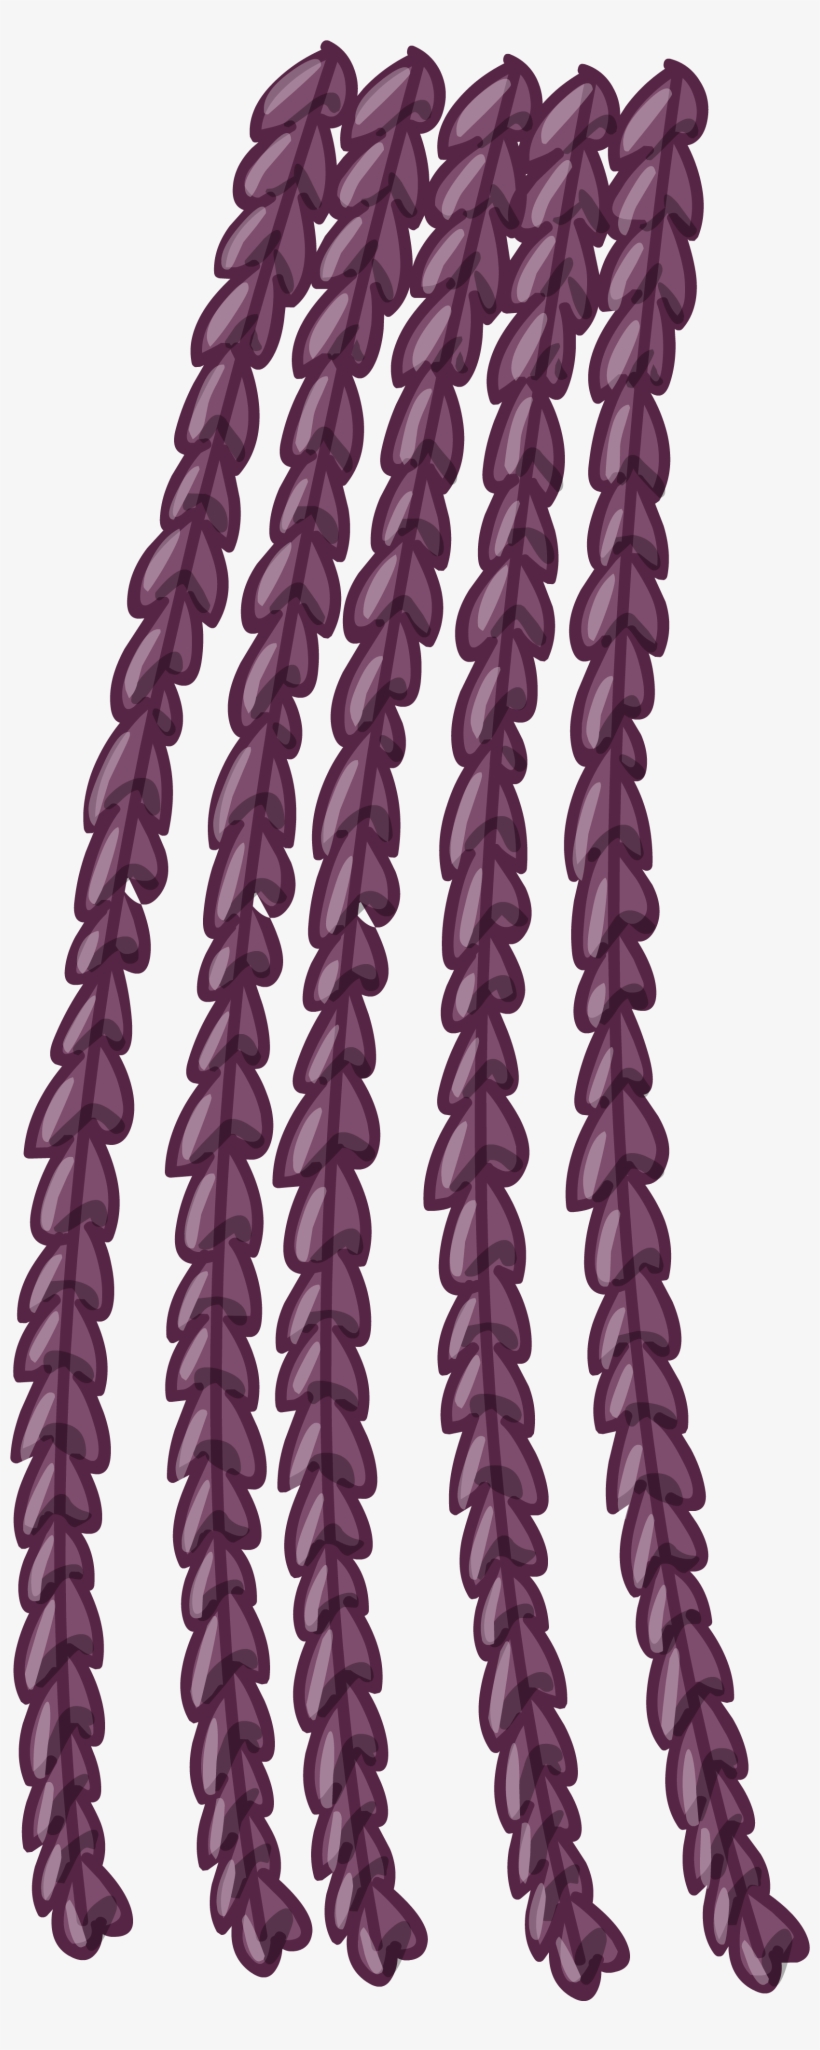 Sea Streamers Sprite 002 - Wire, transparent png #694375